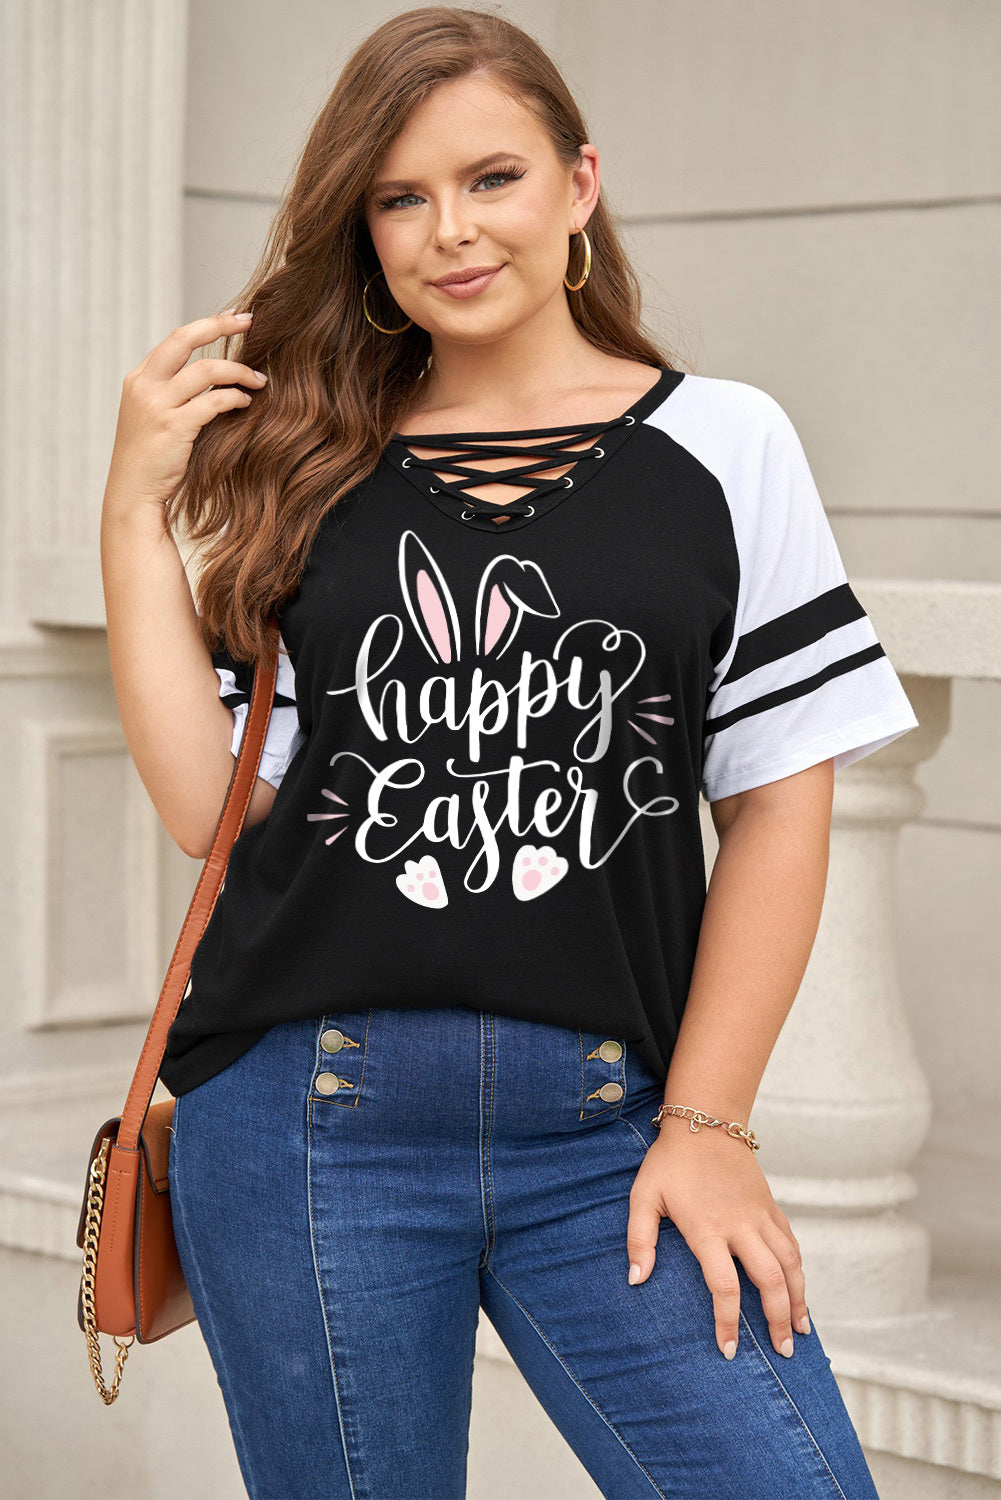 PL252150-2-1X, PL252150-2-2X, PL252150-2-3X, PL252150-2-4X, PL252150-2-5X, Black Plus Size Tee Happy Easter Bunny Graphic Short Sleeve Shirts Tops